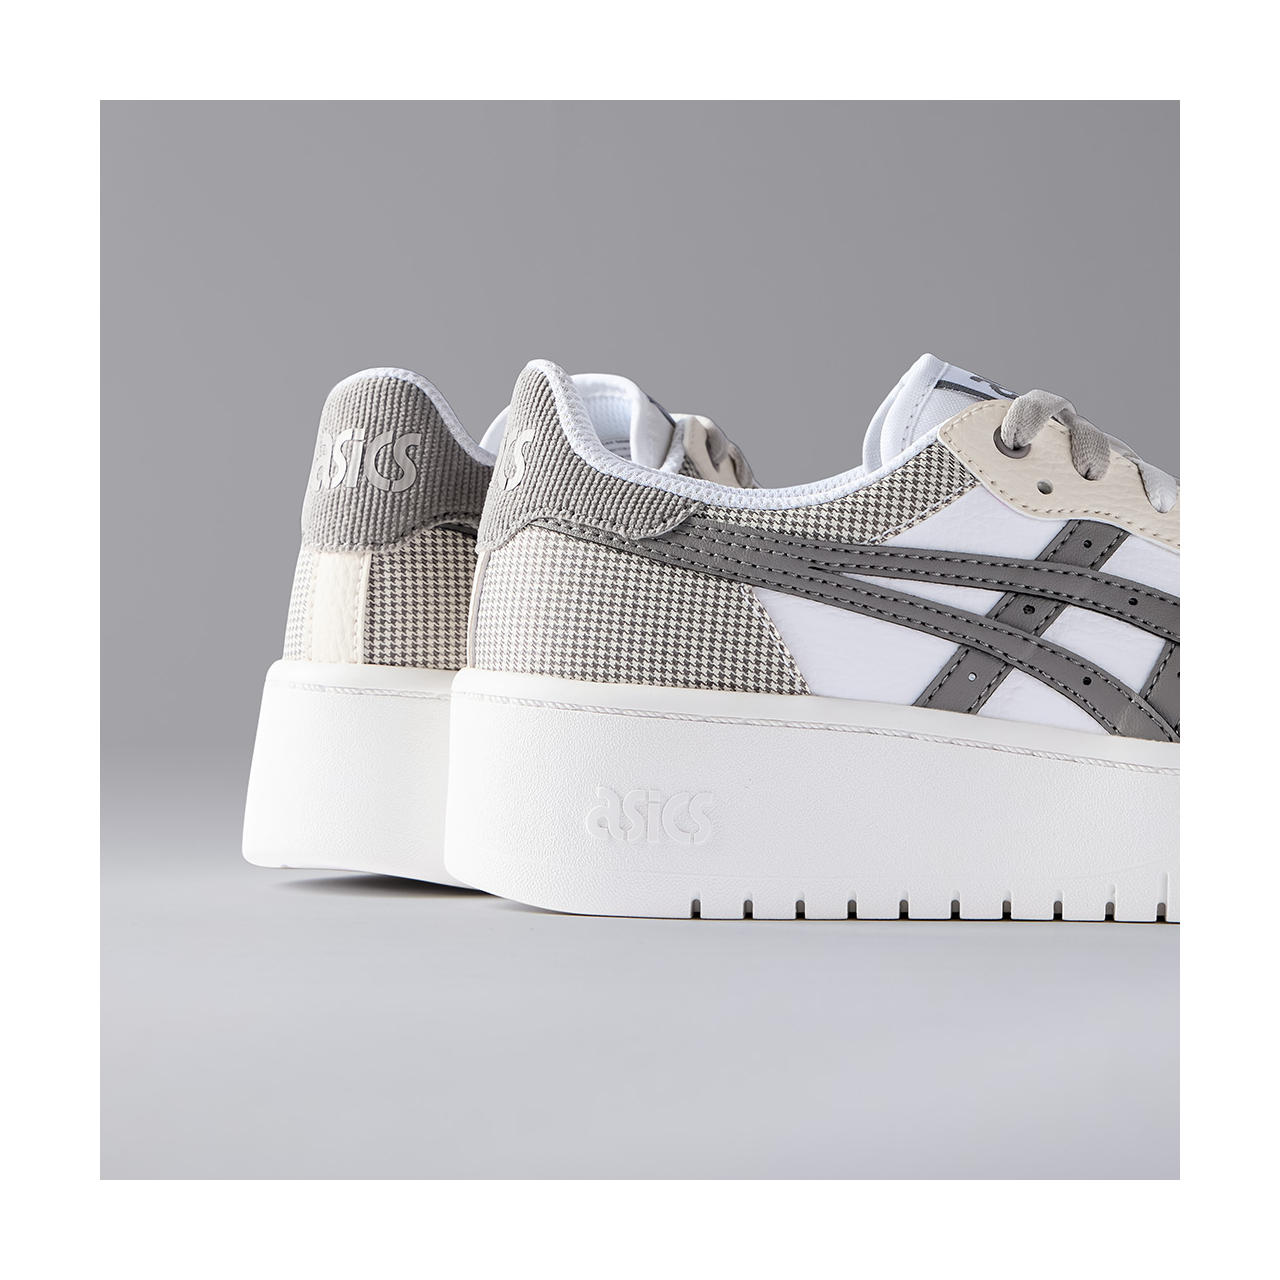 ASICS JAPAN S PF image number null